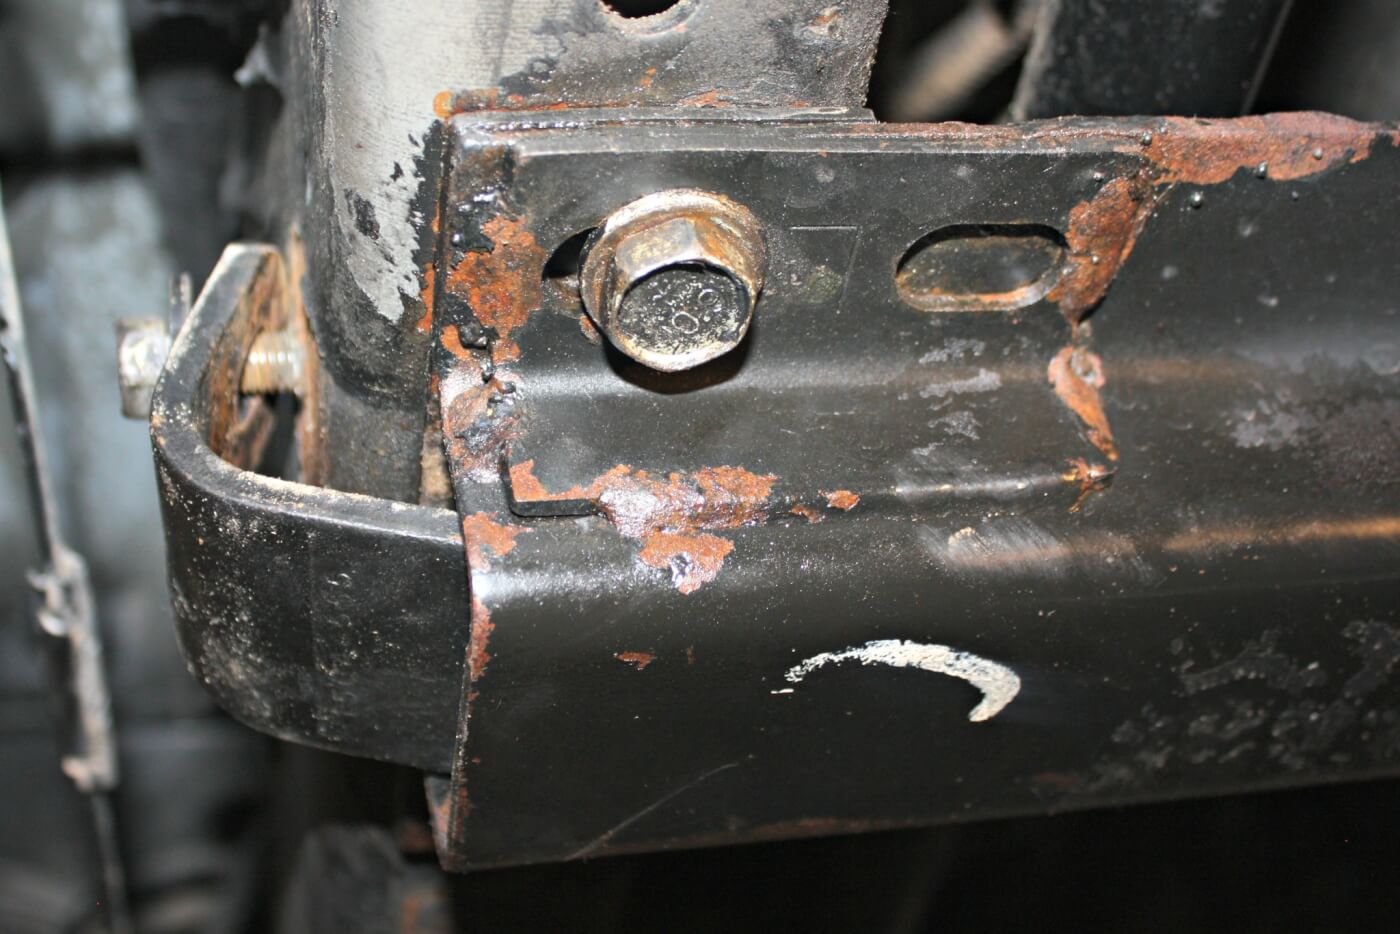 4. After placing a floor jack under the transmission to support its weight, the transmission cross member can be taken out. It is bolted to the frame rails with four large 18mm bolts, two on each side. The outer L-shaped bracket will need to be removed as well. 